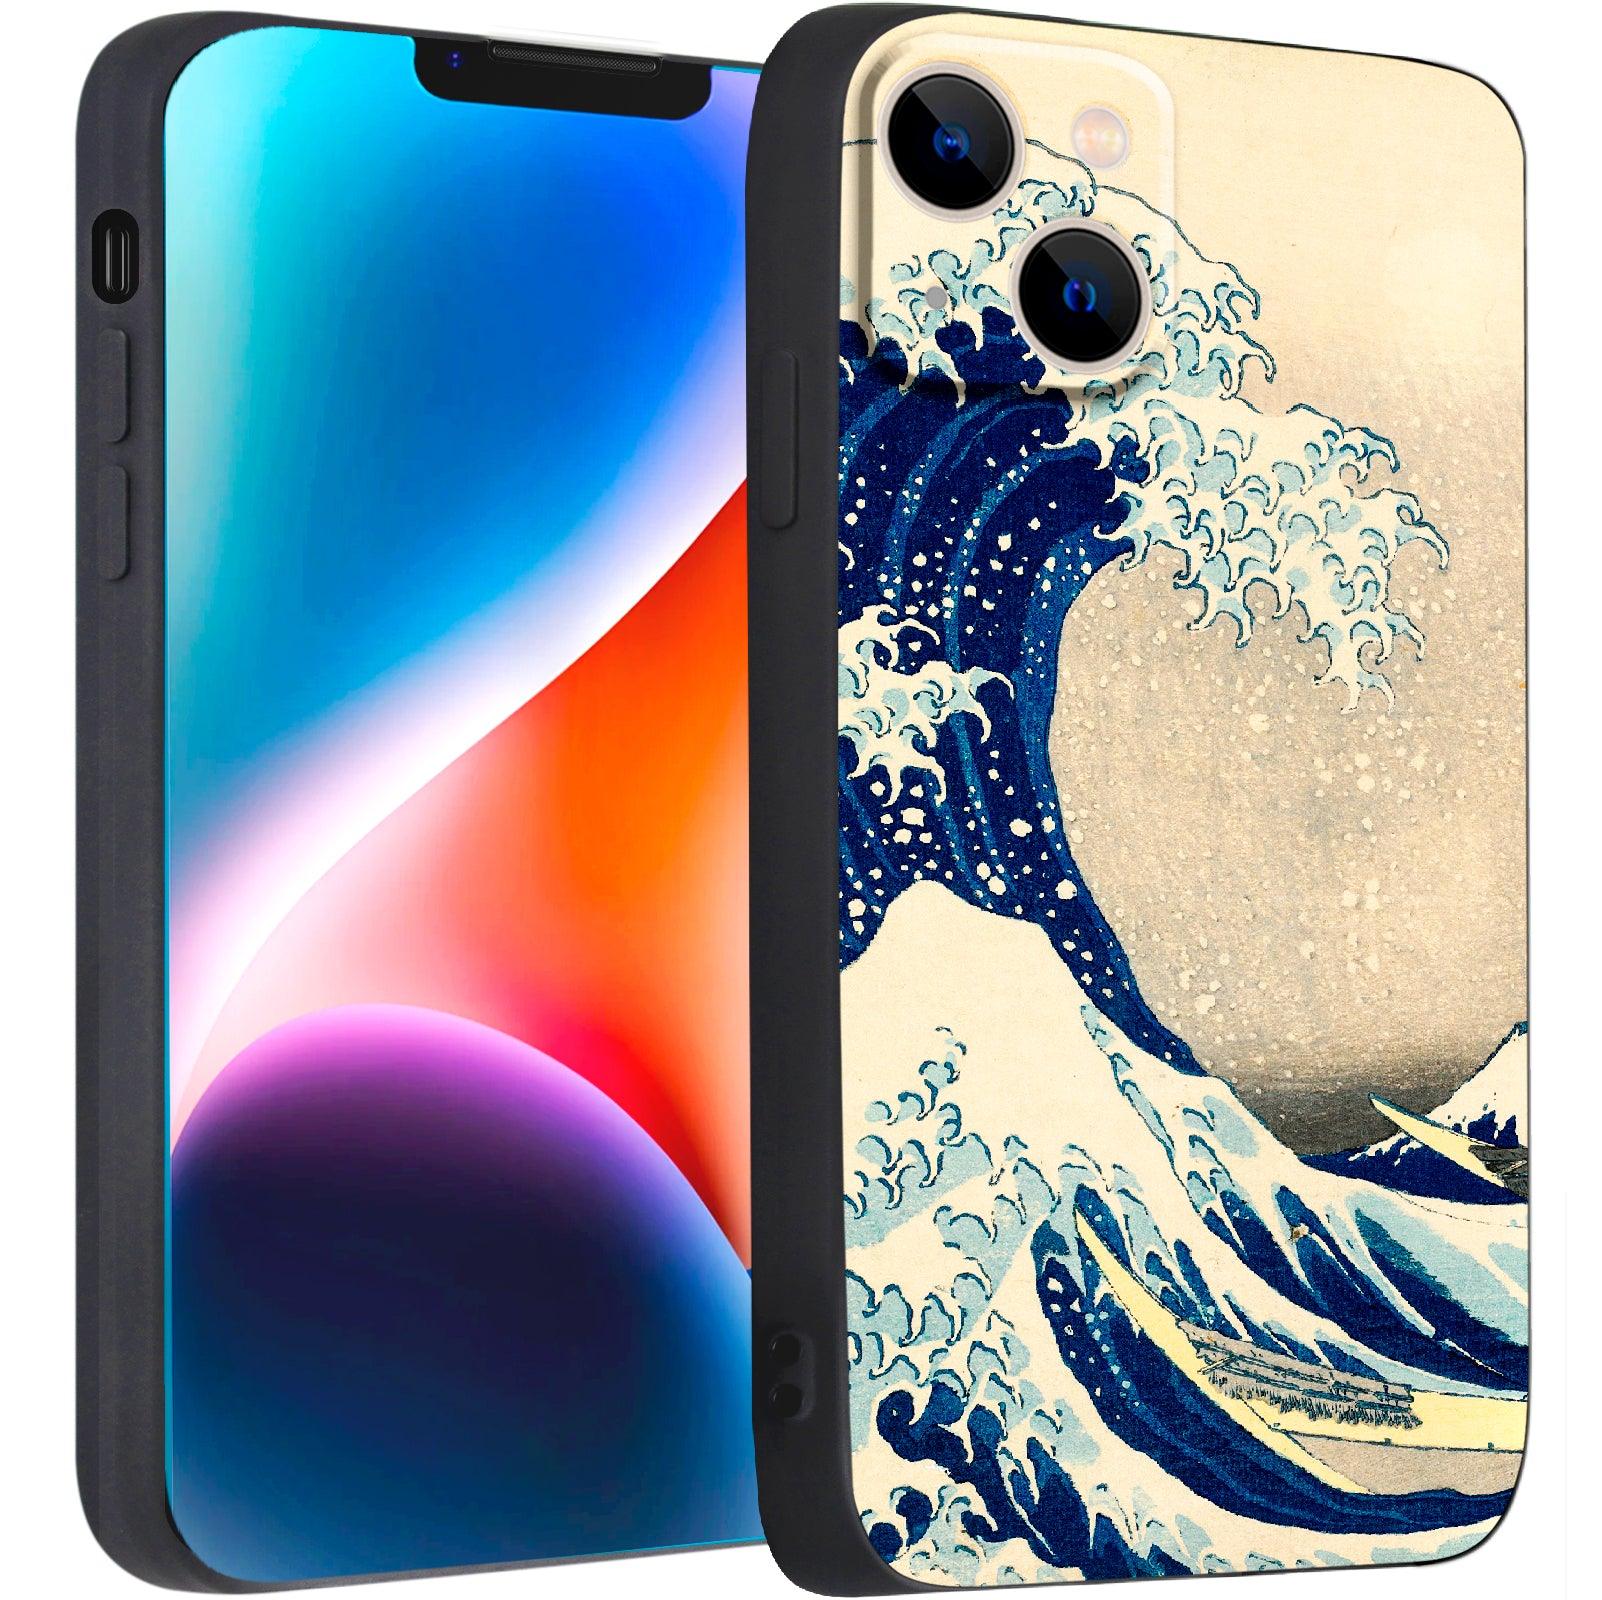 Case Waves Phone, Case Soft Cover, Iphone 7 Wavy Case